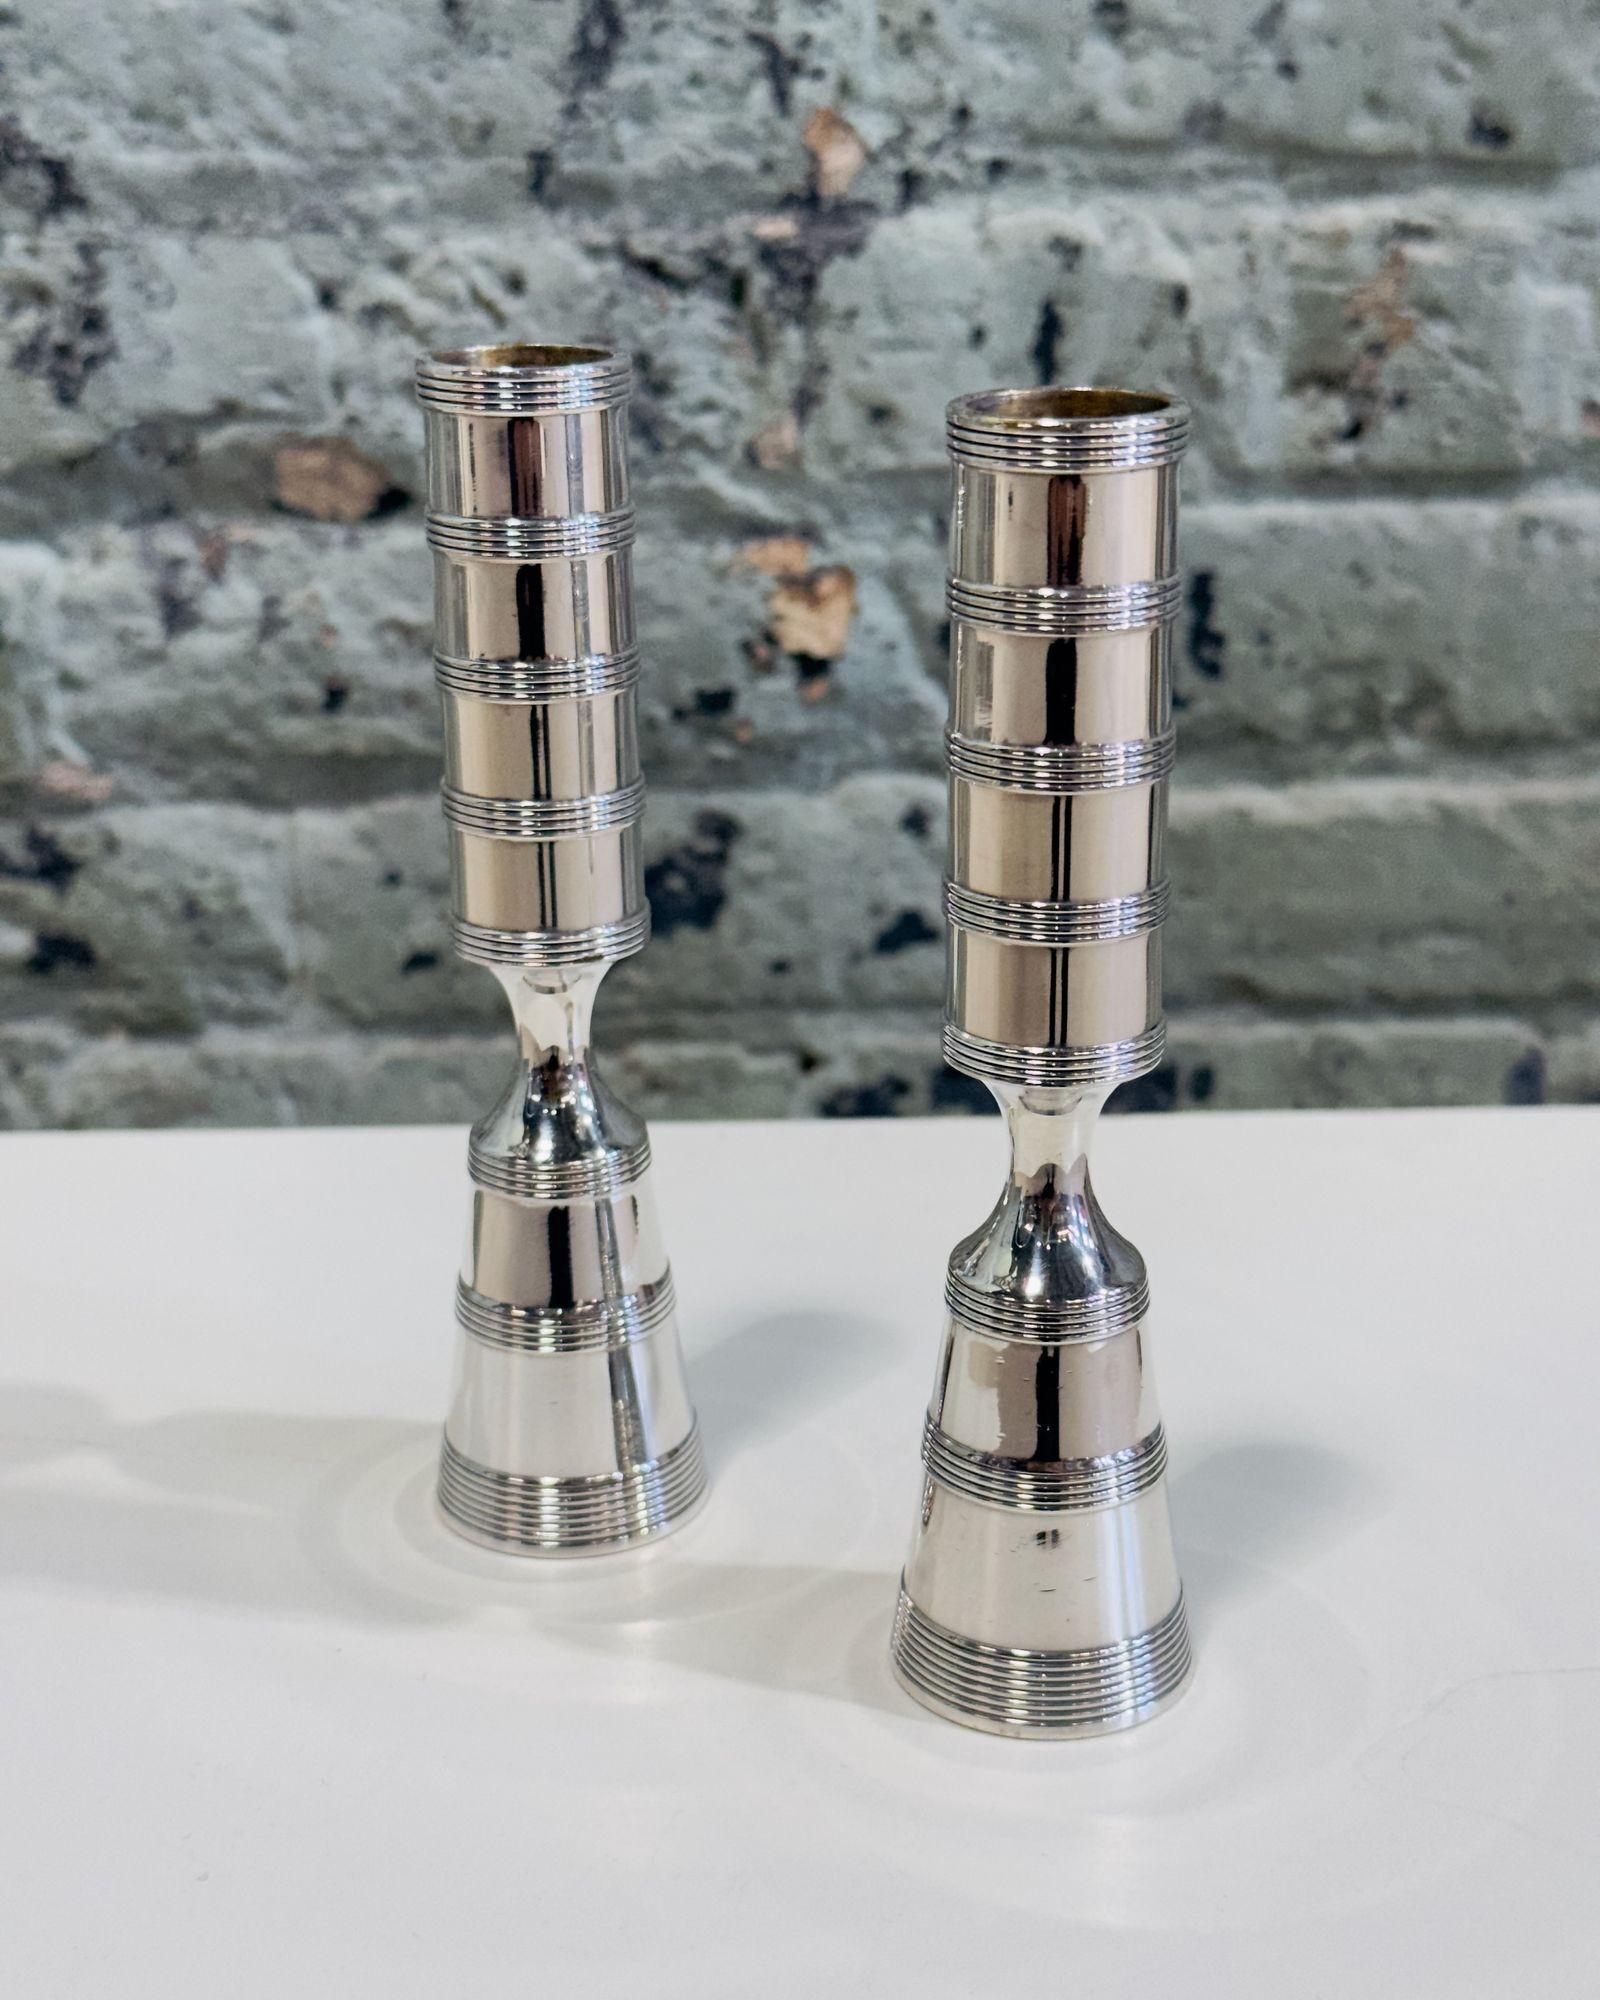 Pair Dansk Candlestick Holders by Jens Quisgard, 1960.
Silver plated rare model, original pieces from the 60's.
Measure 6.25